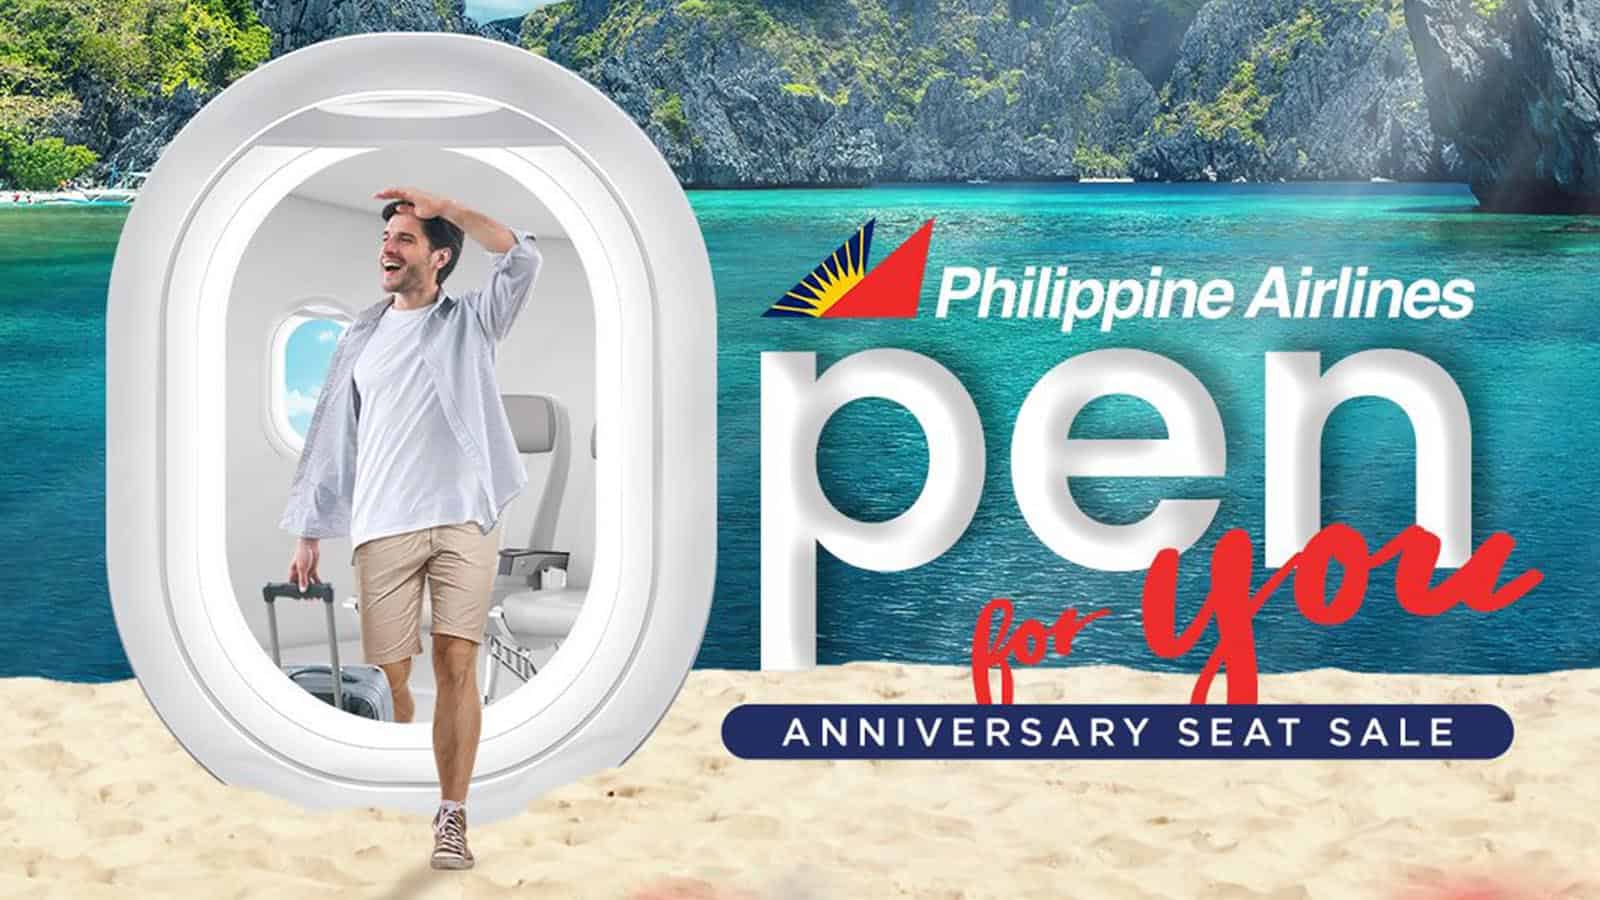 Philippine Airlines PROMO: 81st Anniversary Seat Sale